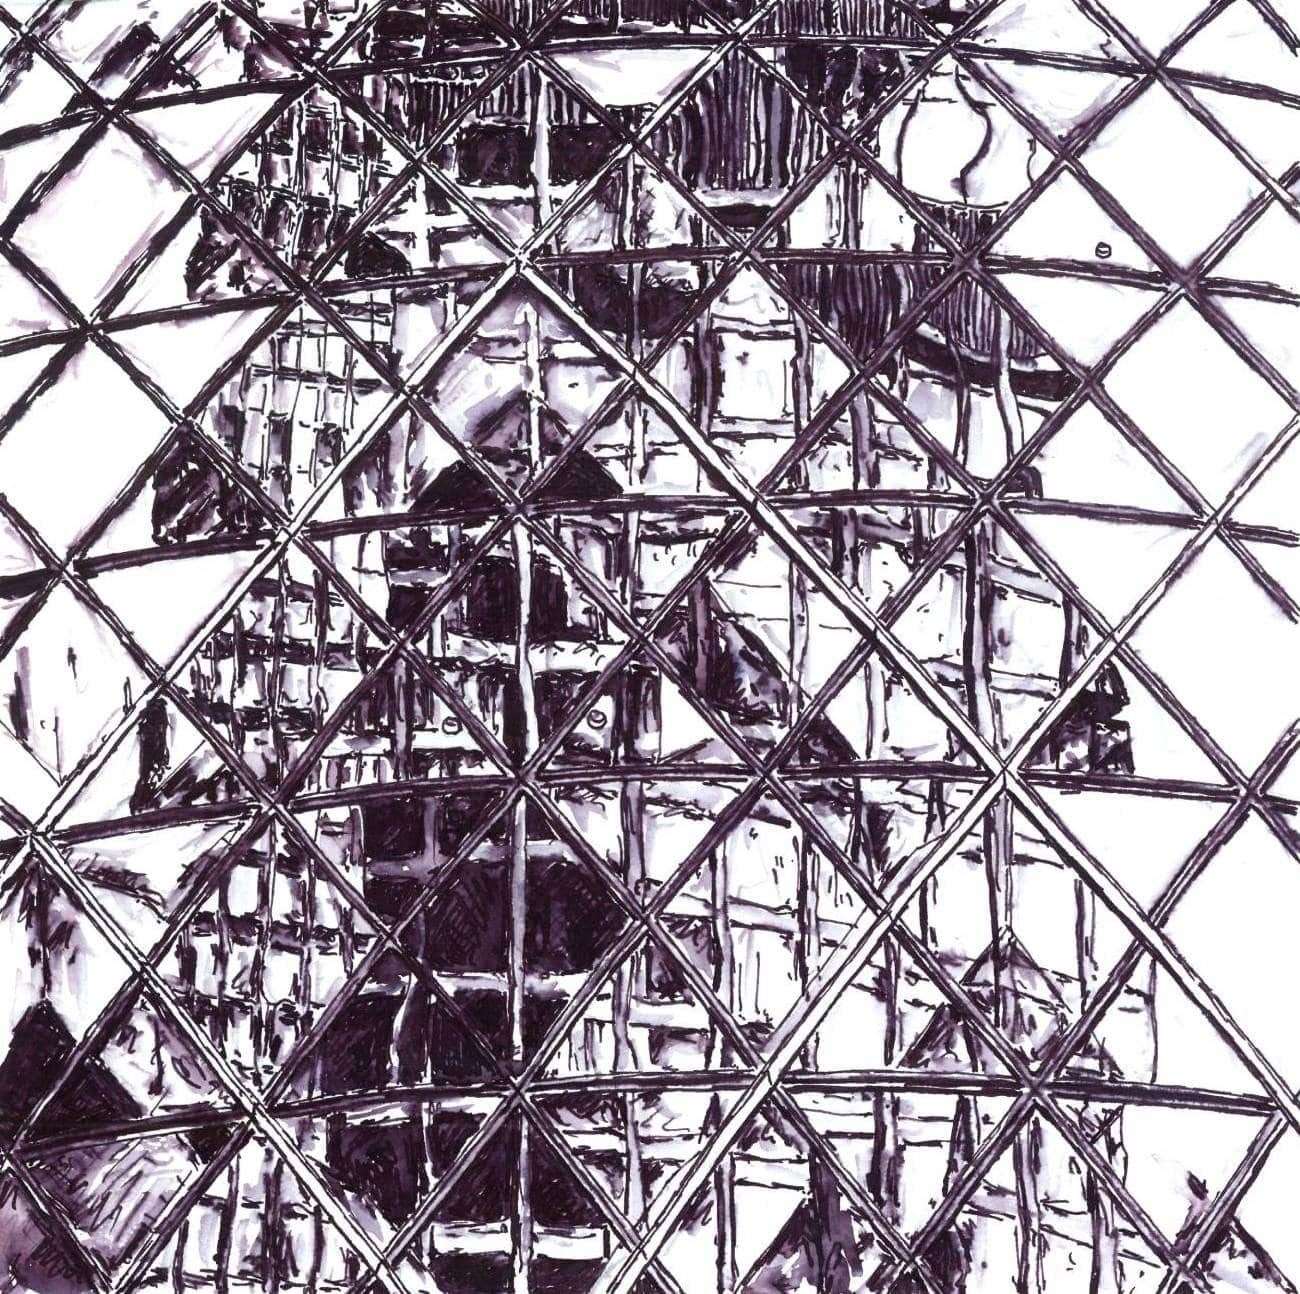 Jack Hines and his intricate drawings of London's buildings such as the Gherkin